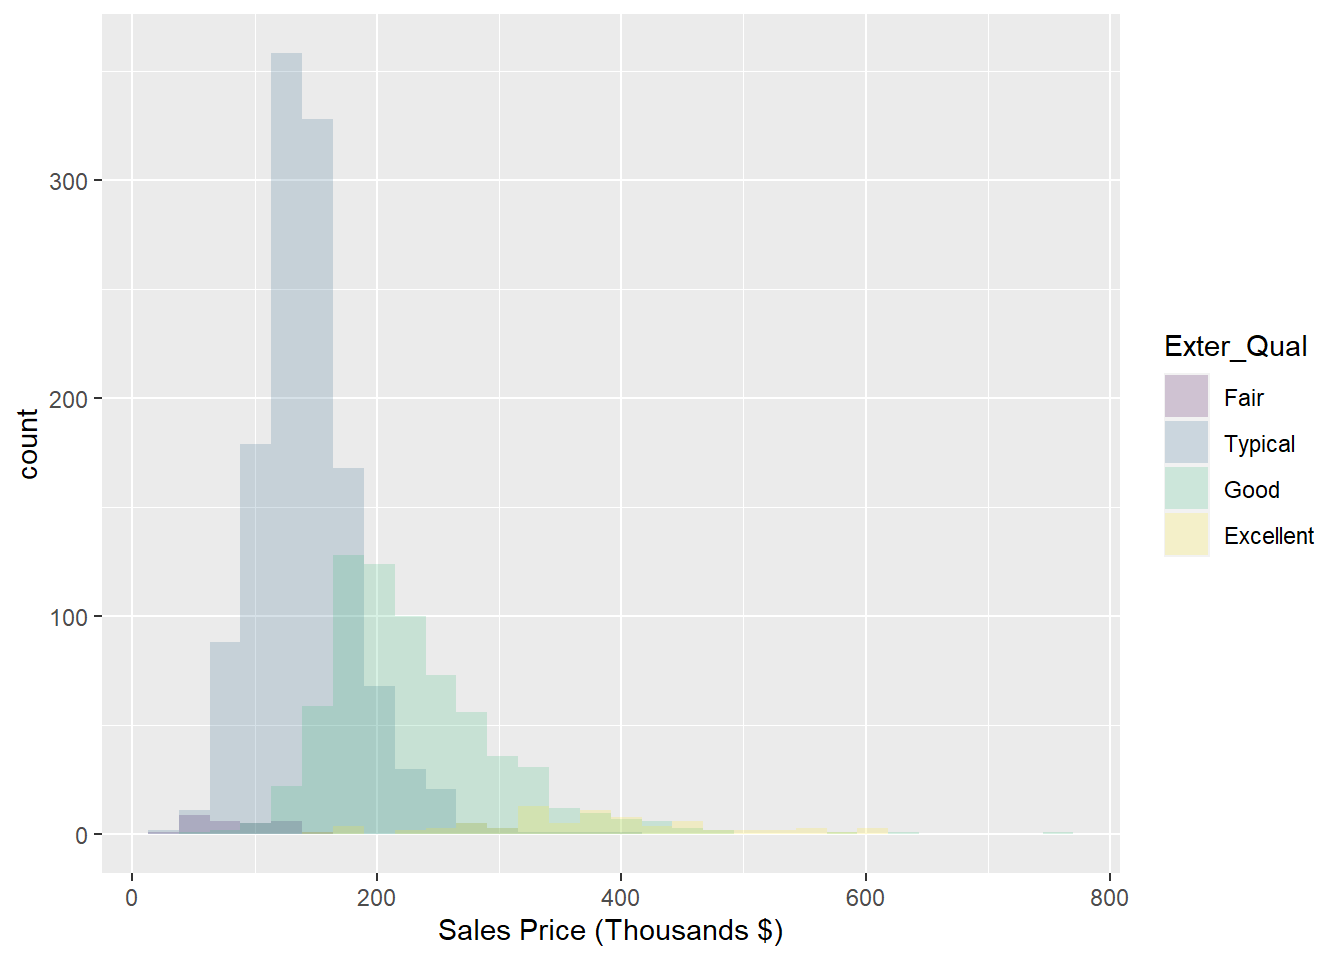 Histogram: Frequency of Sale_Price for varying qualities of home exterior